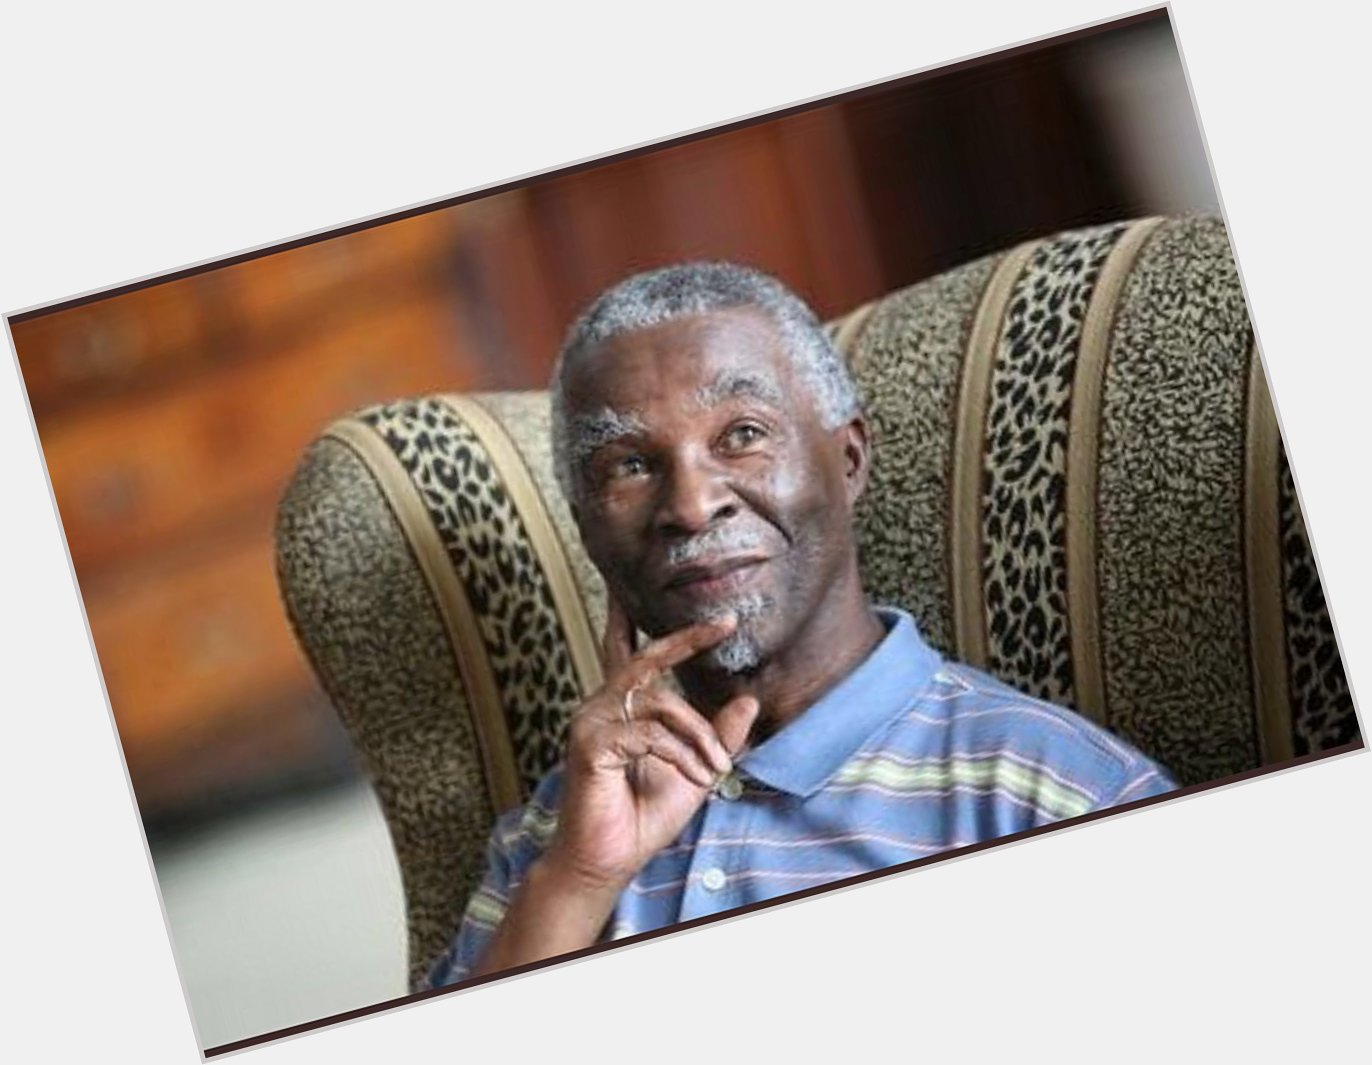 THABO MBEKI
A happy birthday to this African intellectual giant. 